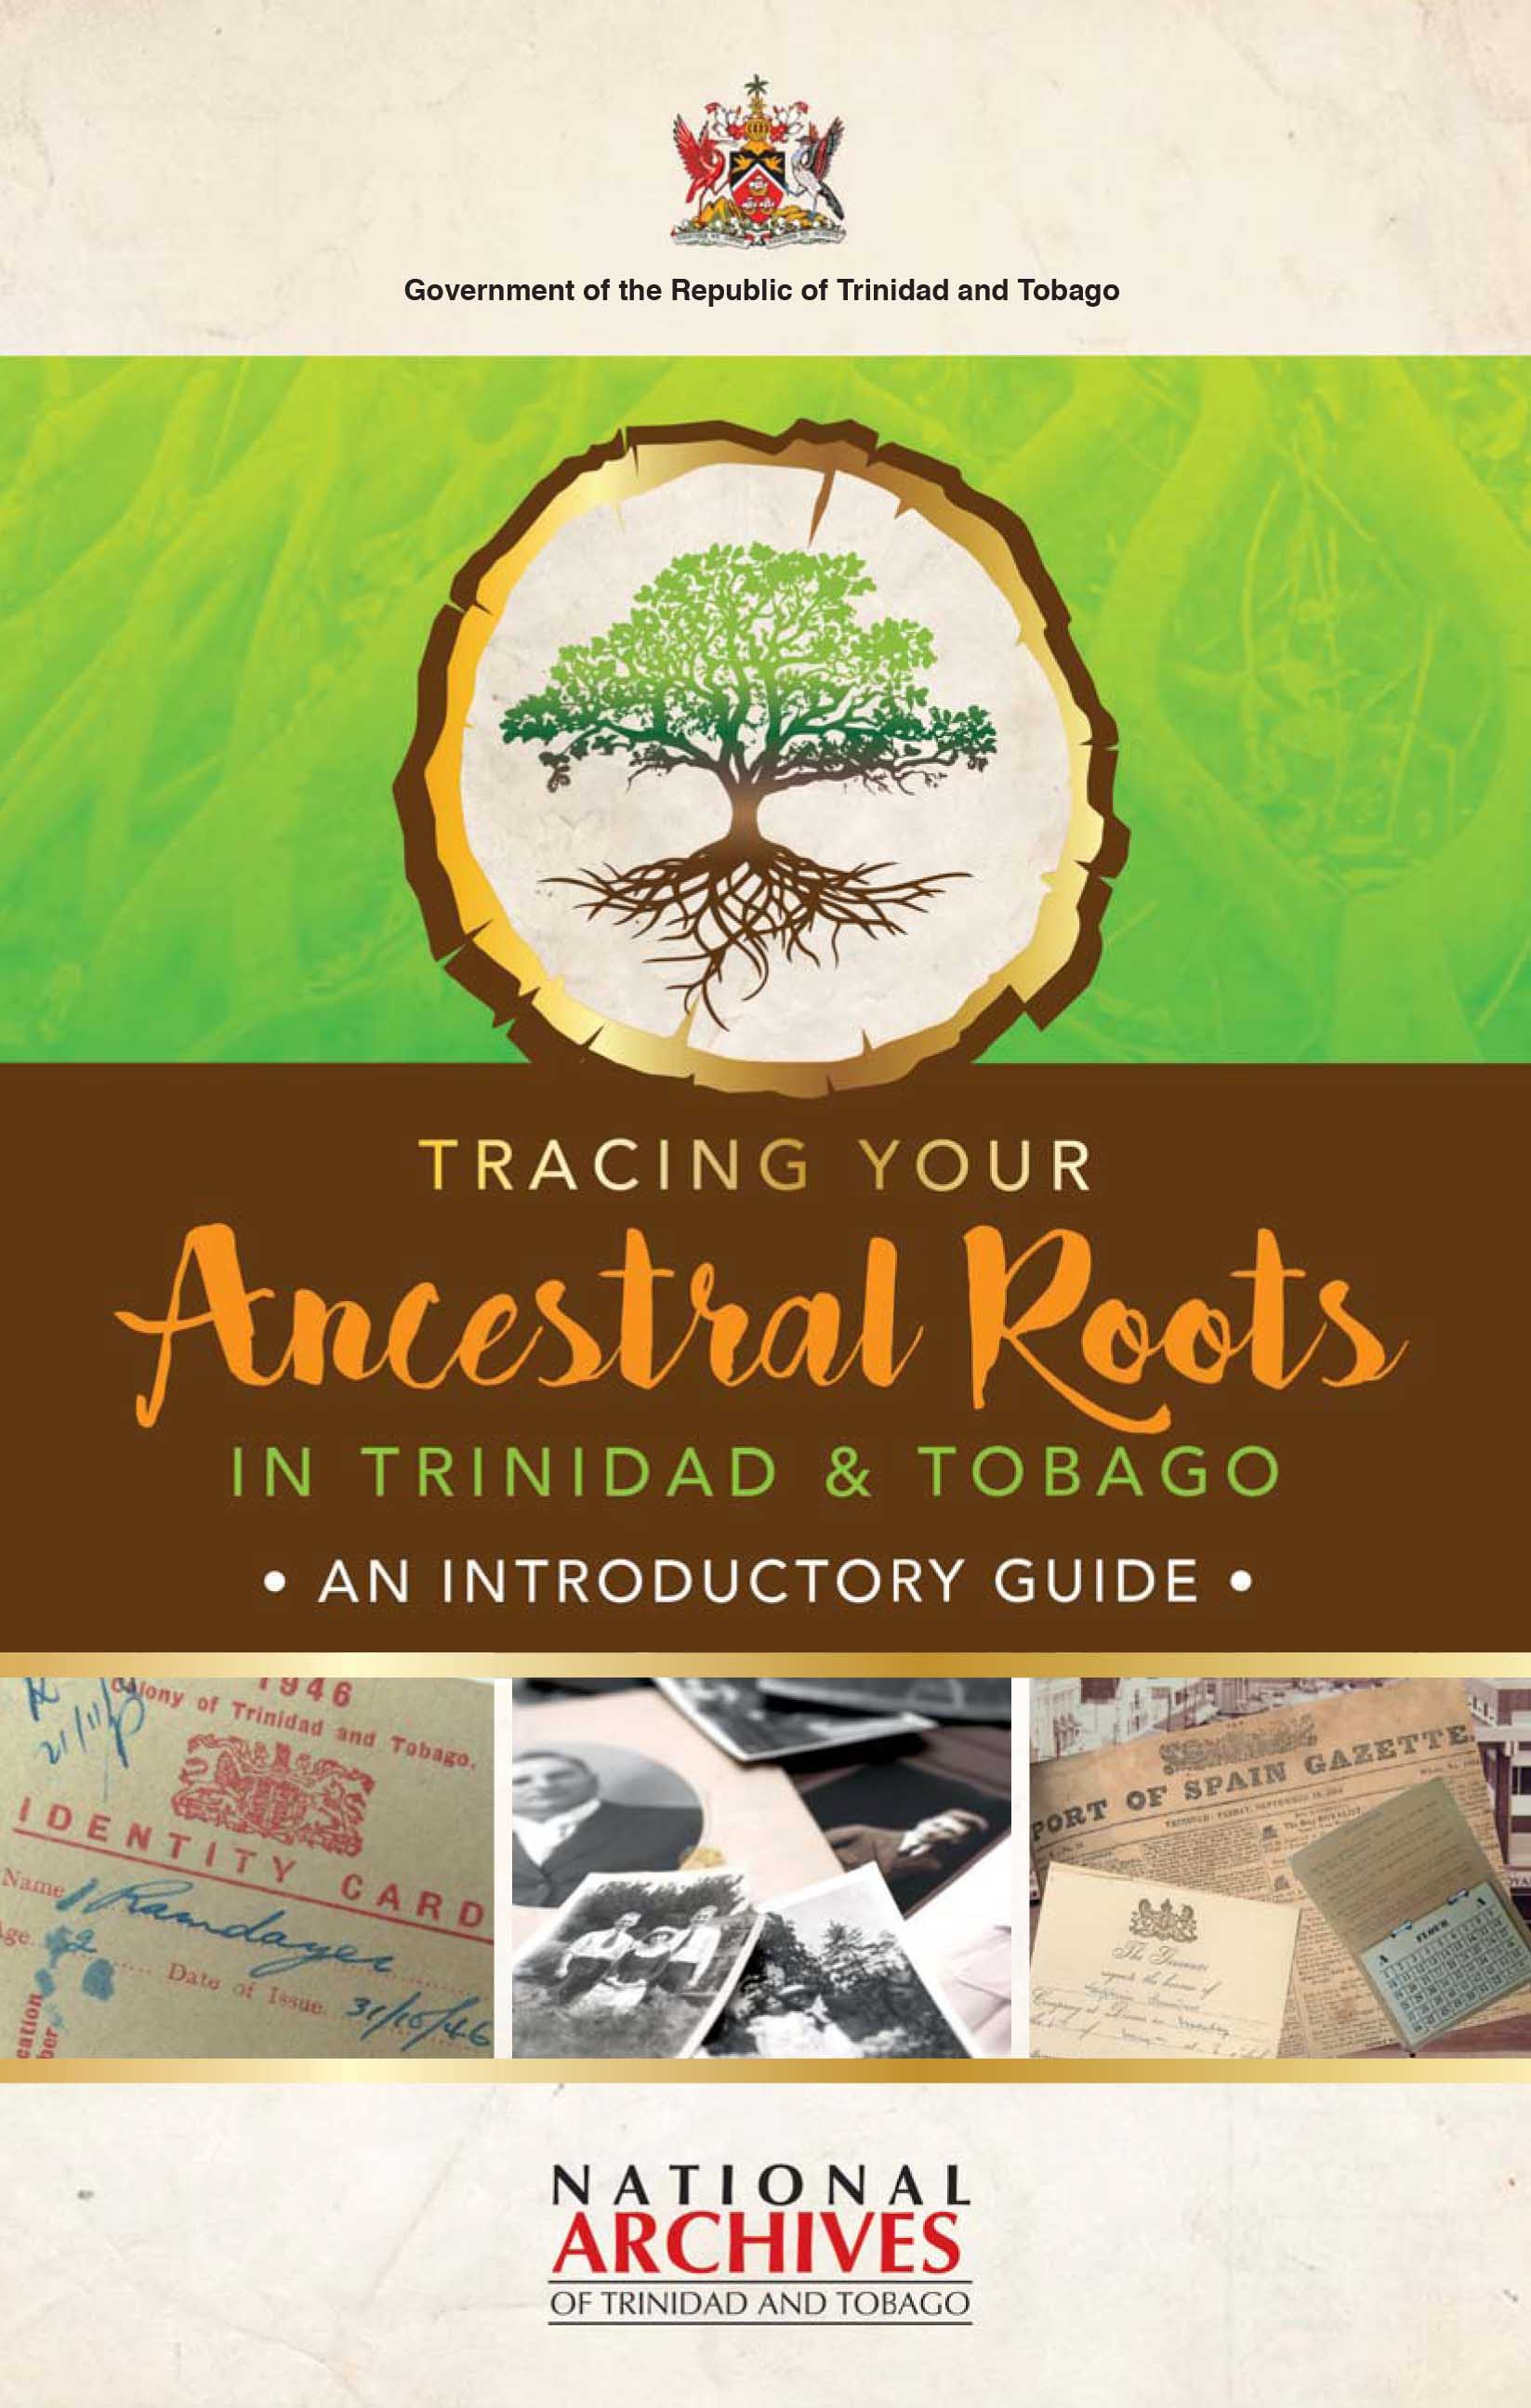 Tracing ancestral roots